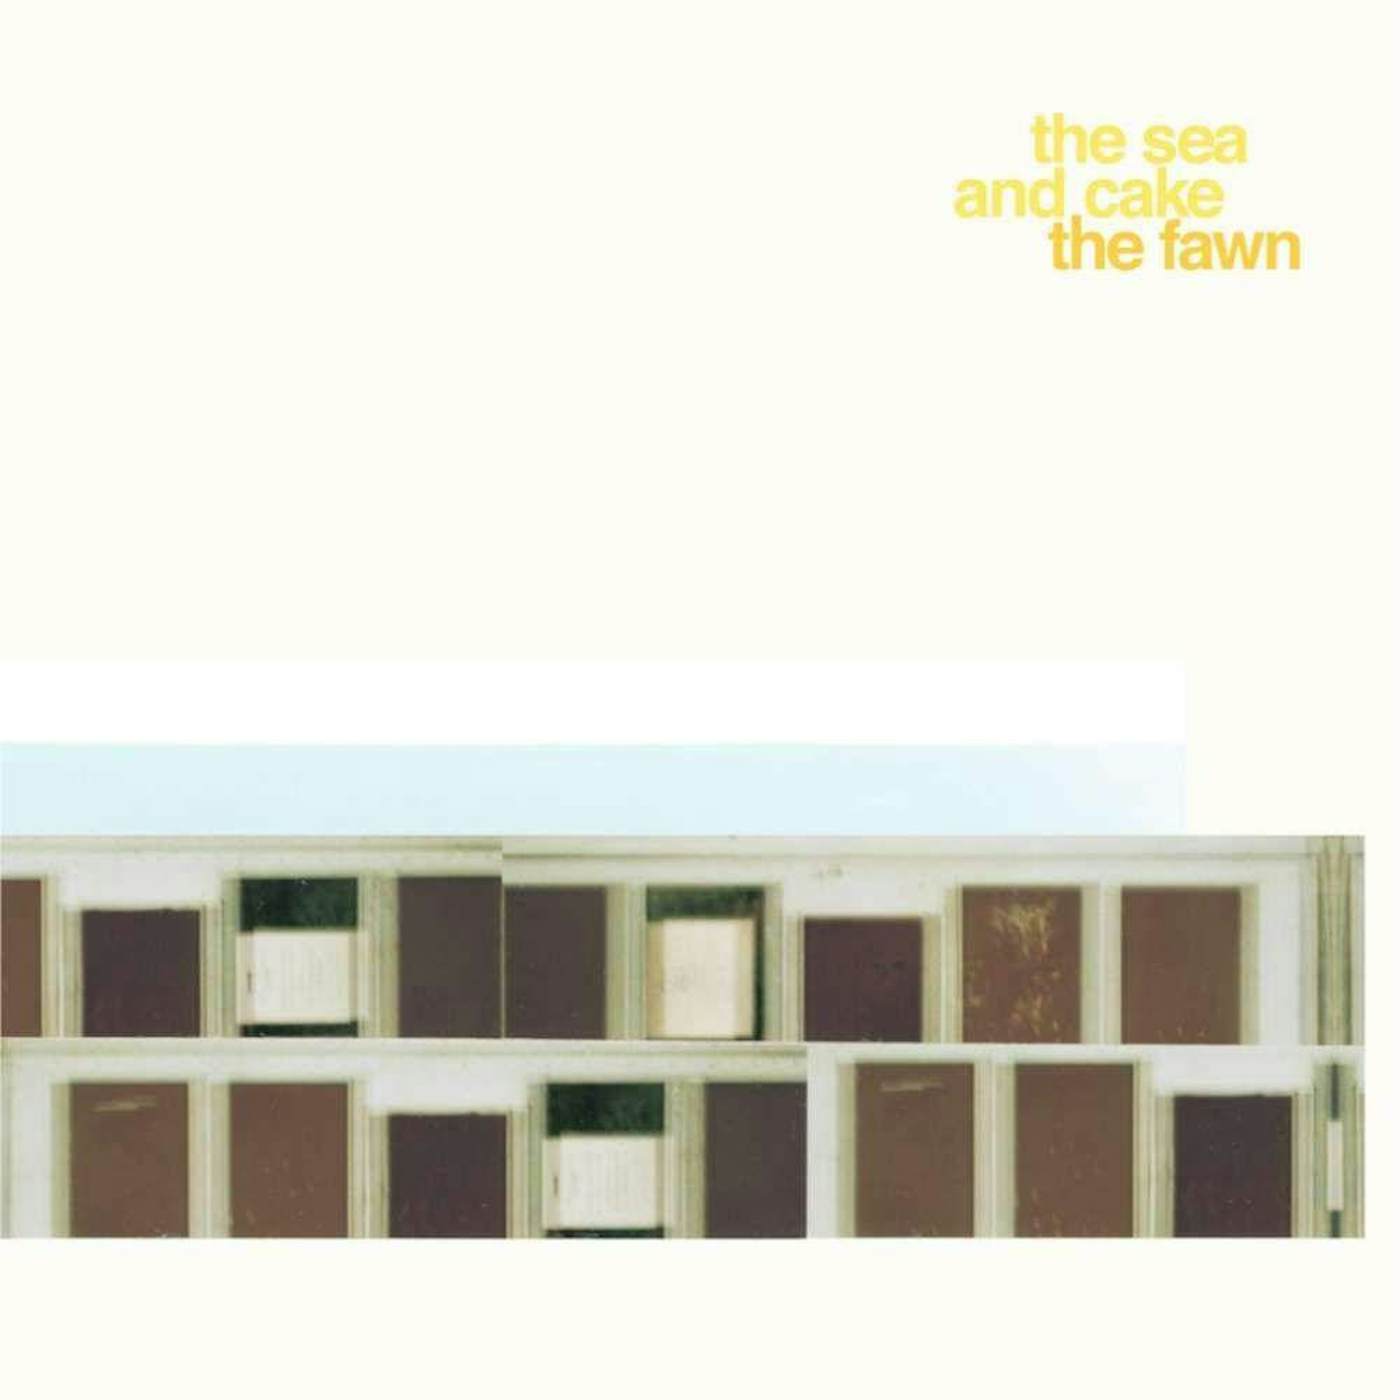 The Sea and Cake Fawn (Limited/Blue Vinyl) (I) Vinyl Record